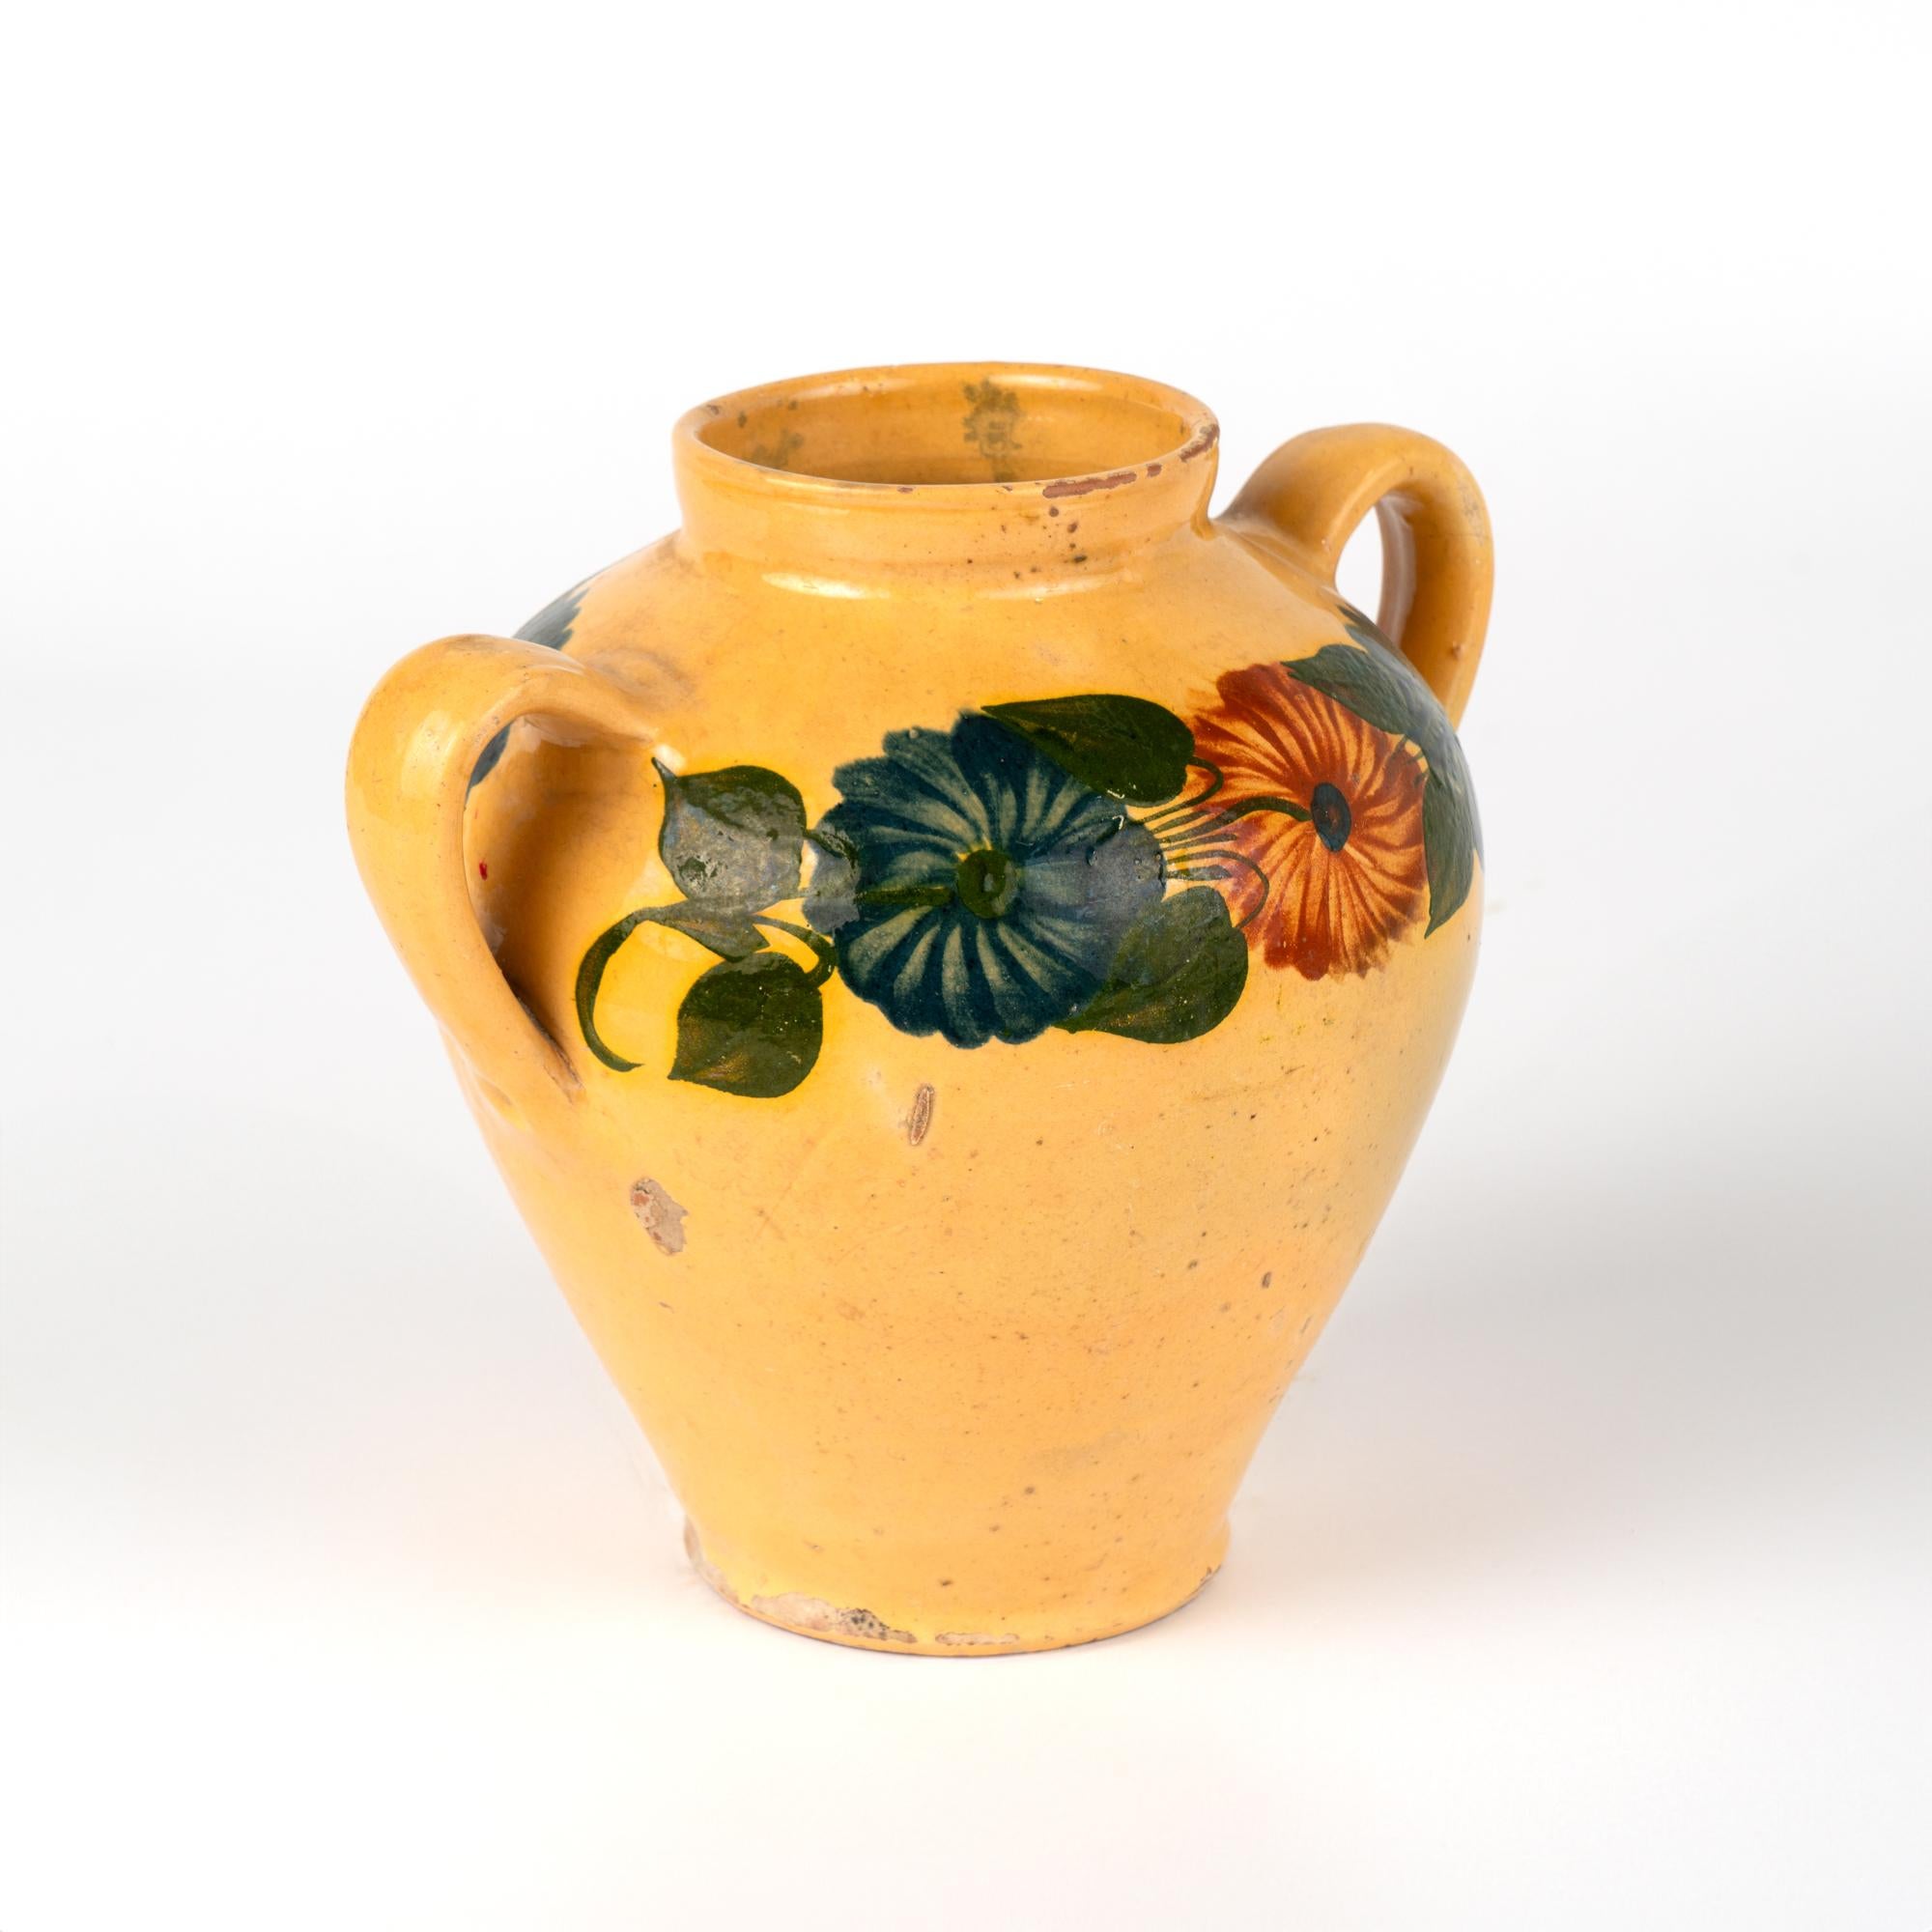 Original hand painted earthenware pottery with two handles. Yellow background with floral design.
Sold in original vintage used condition. Any chips, cracks, stains, distress to paint or pottery is reflective of age and use. Solid condition.

With